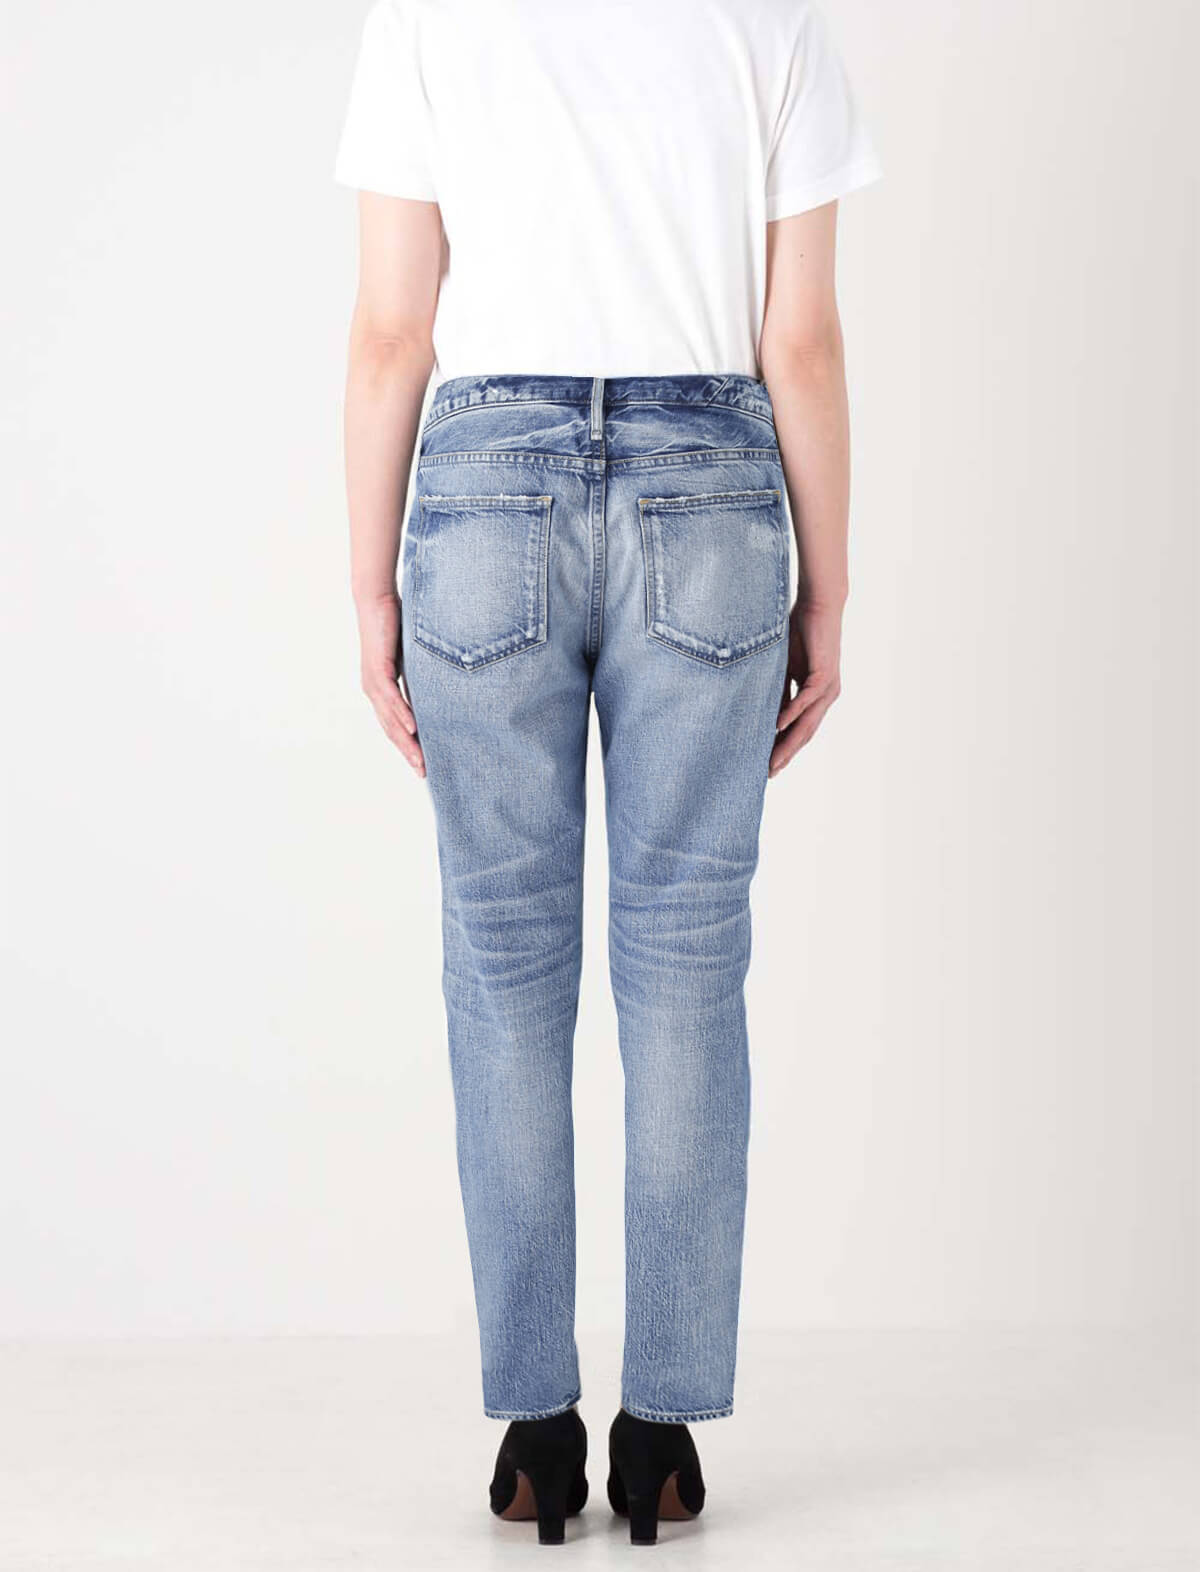 UPPER HIGHTS The Lipstick Midrise Straight Jeans in Topaz